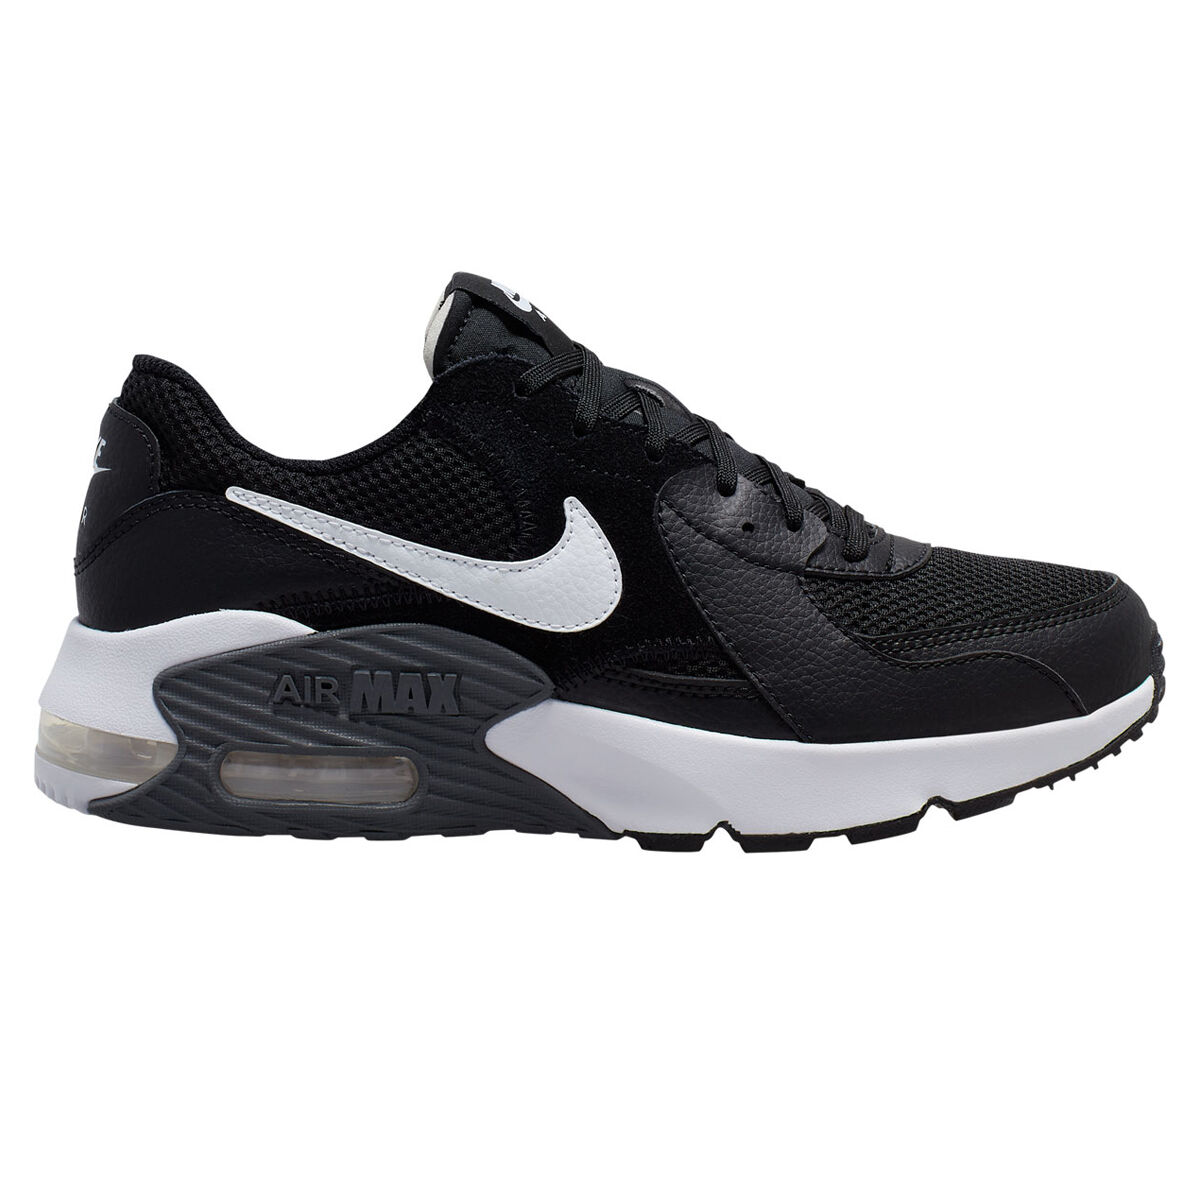 women's nike air max athletic shoes